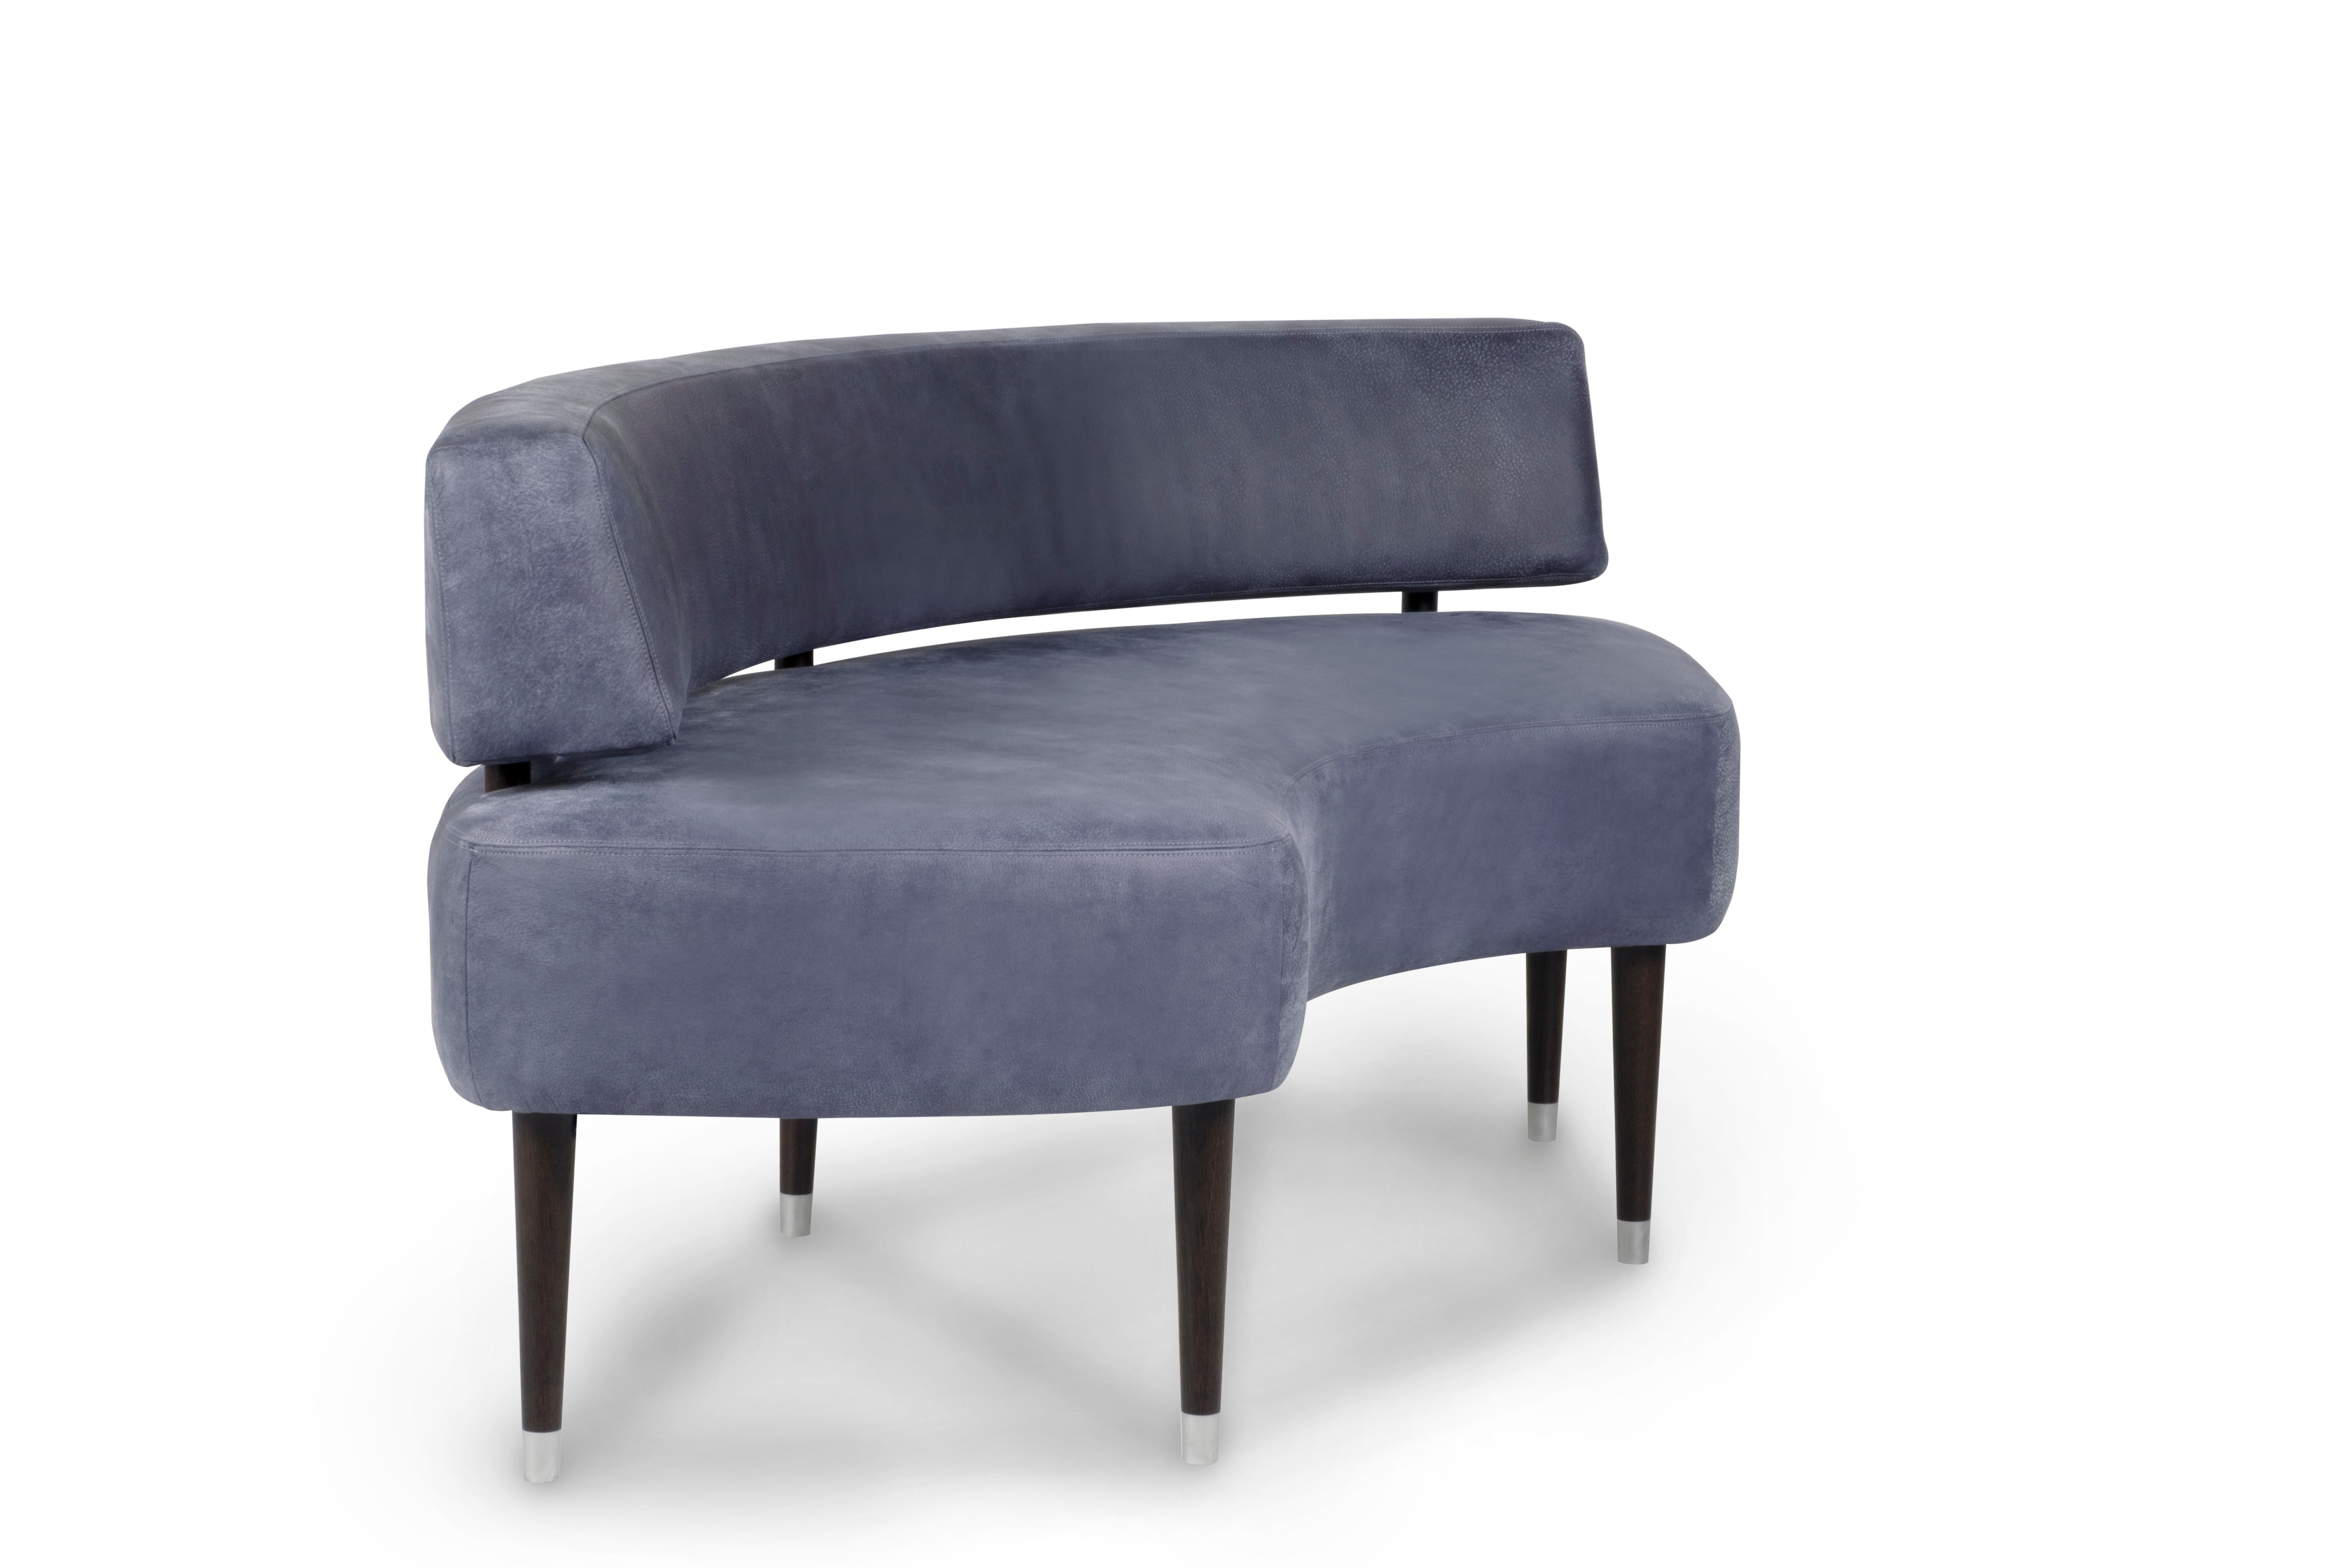 Liz Curved Bench, Contemporary Collection, Handcrafted in Portugal - Europe by Greenapple.

The Liz bench offers simplicity and comfort for relaxed moments, without forgetting that the small details make all the difference.

Upholstered in blue